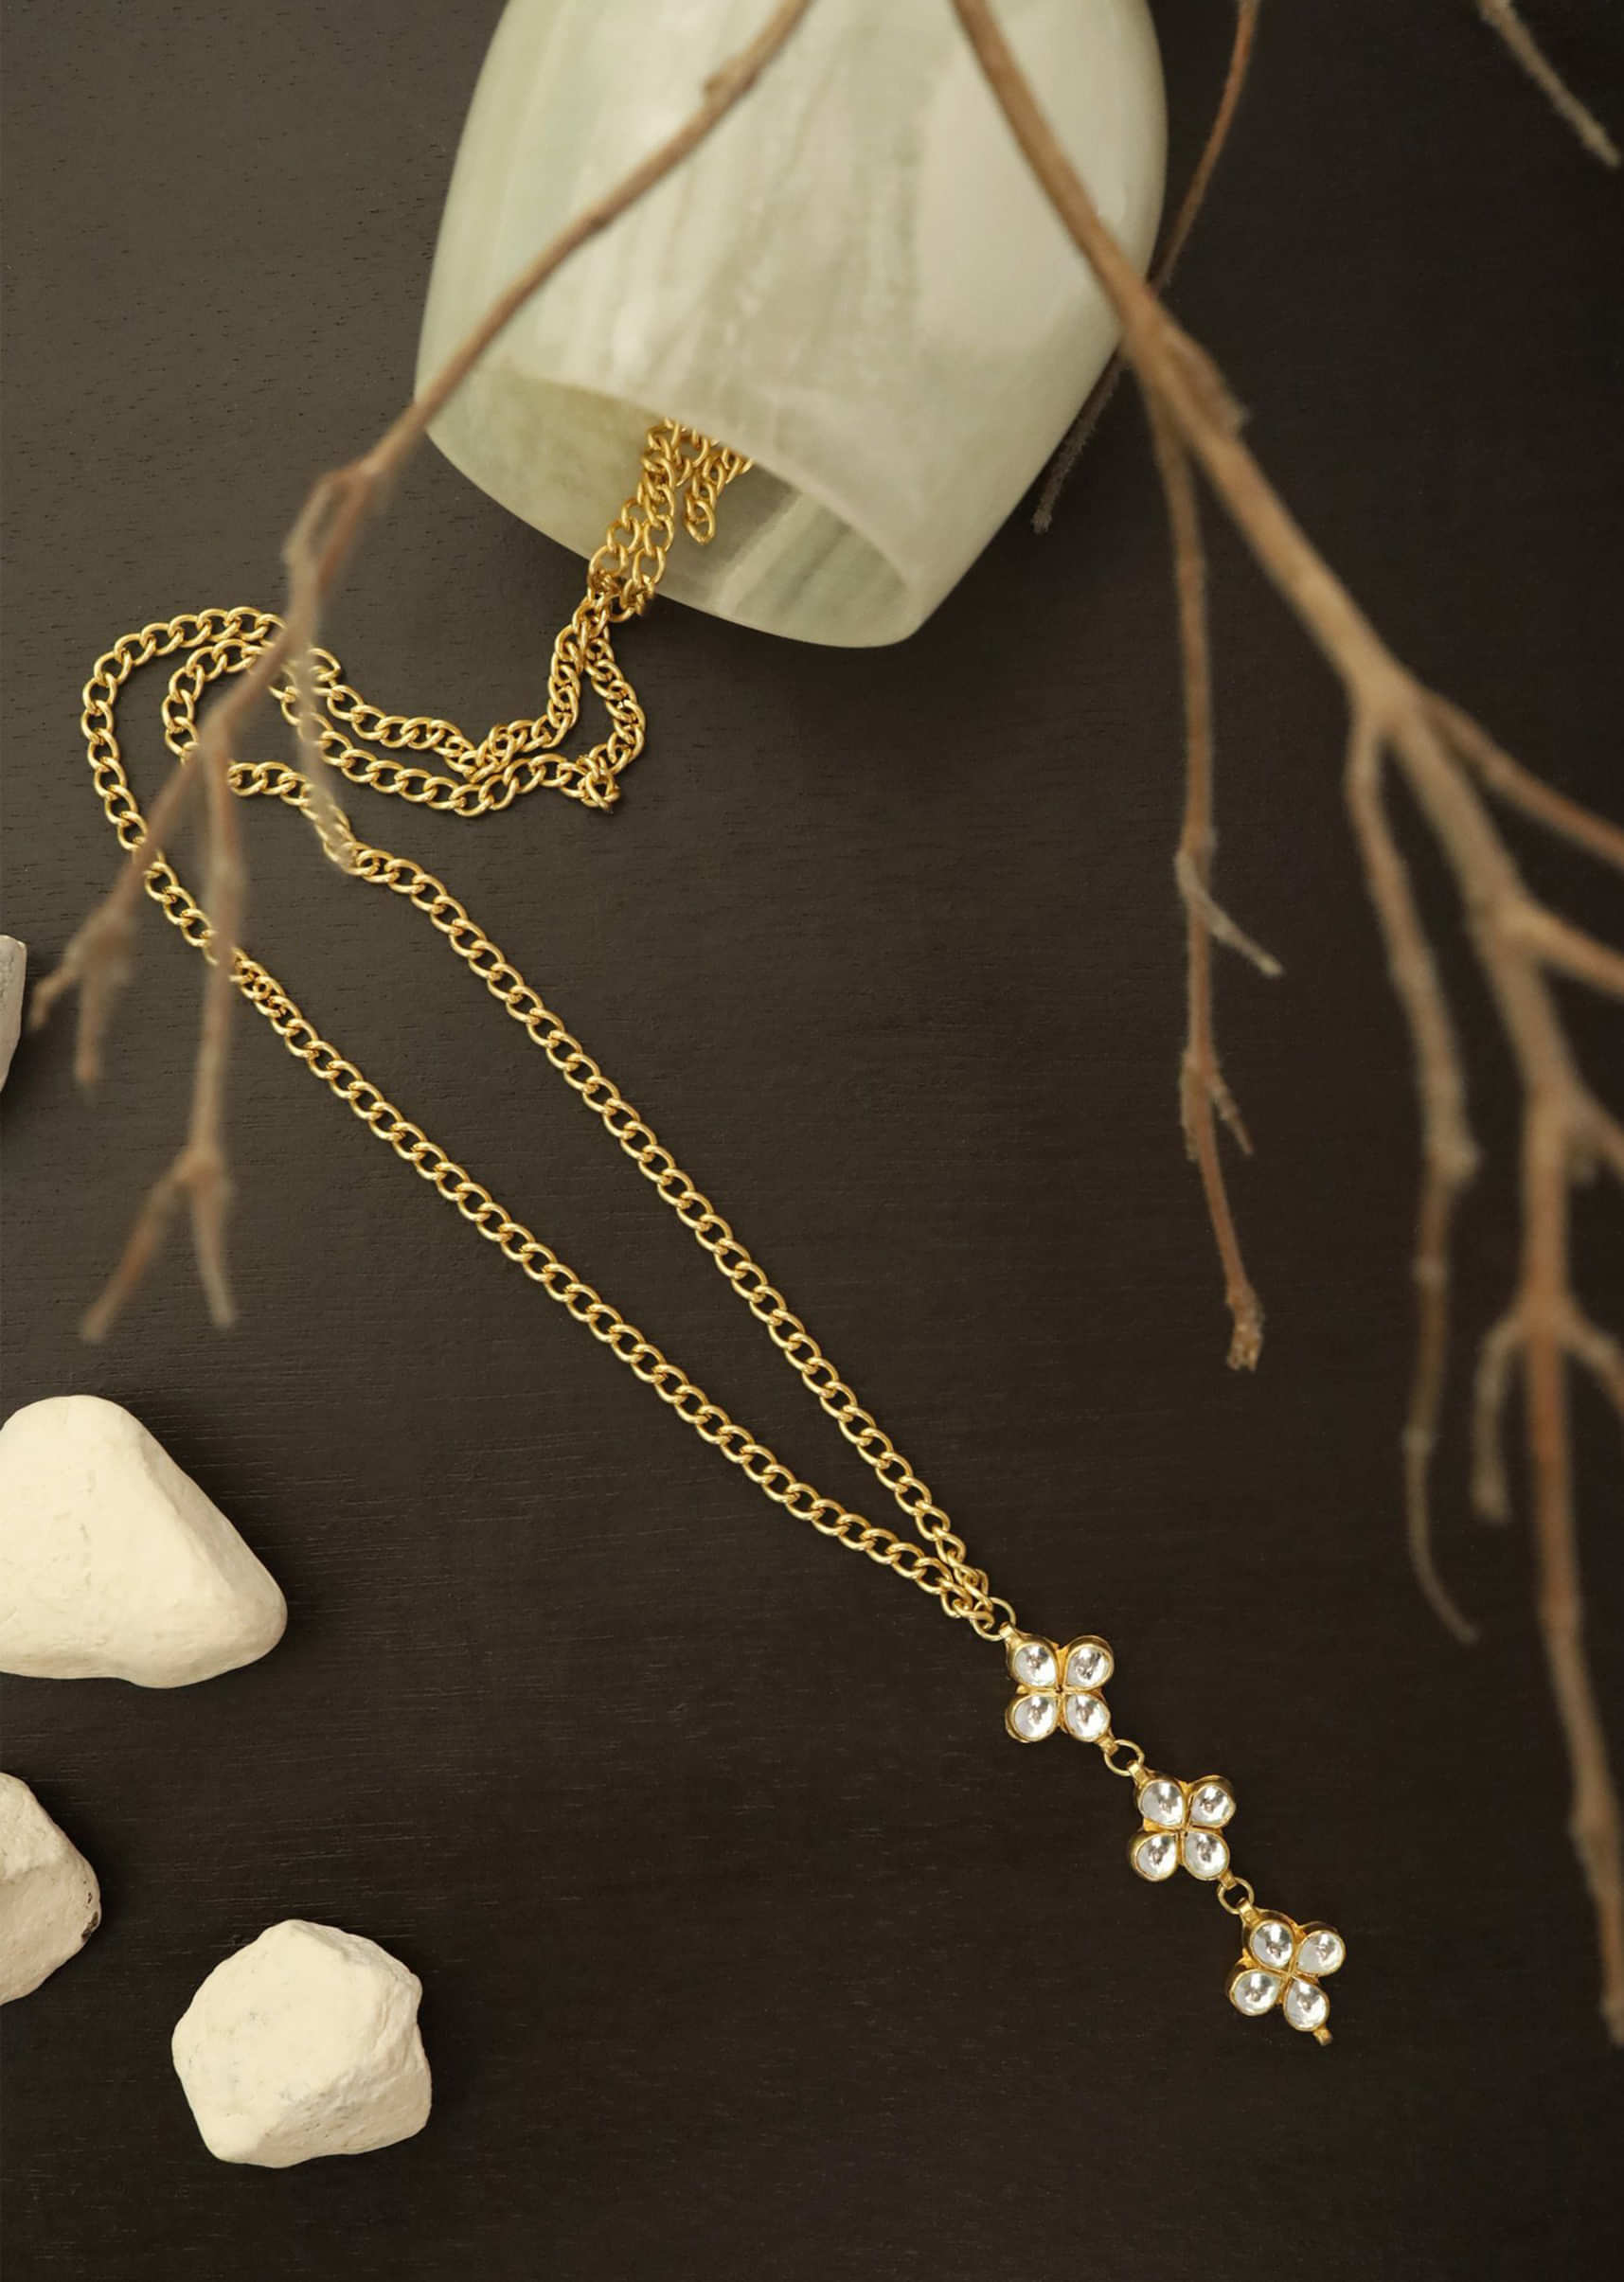 Gold Plated Necklace With Floral Chain Encrusted With Kundan Pendant